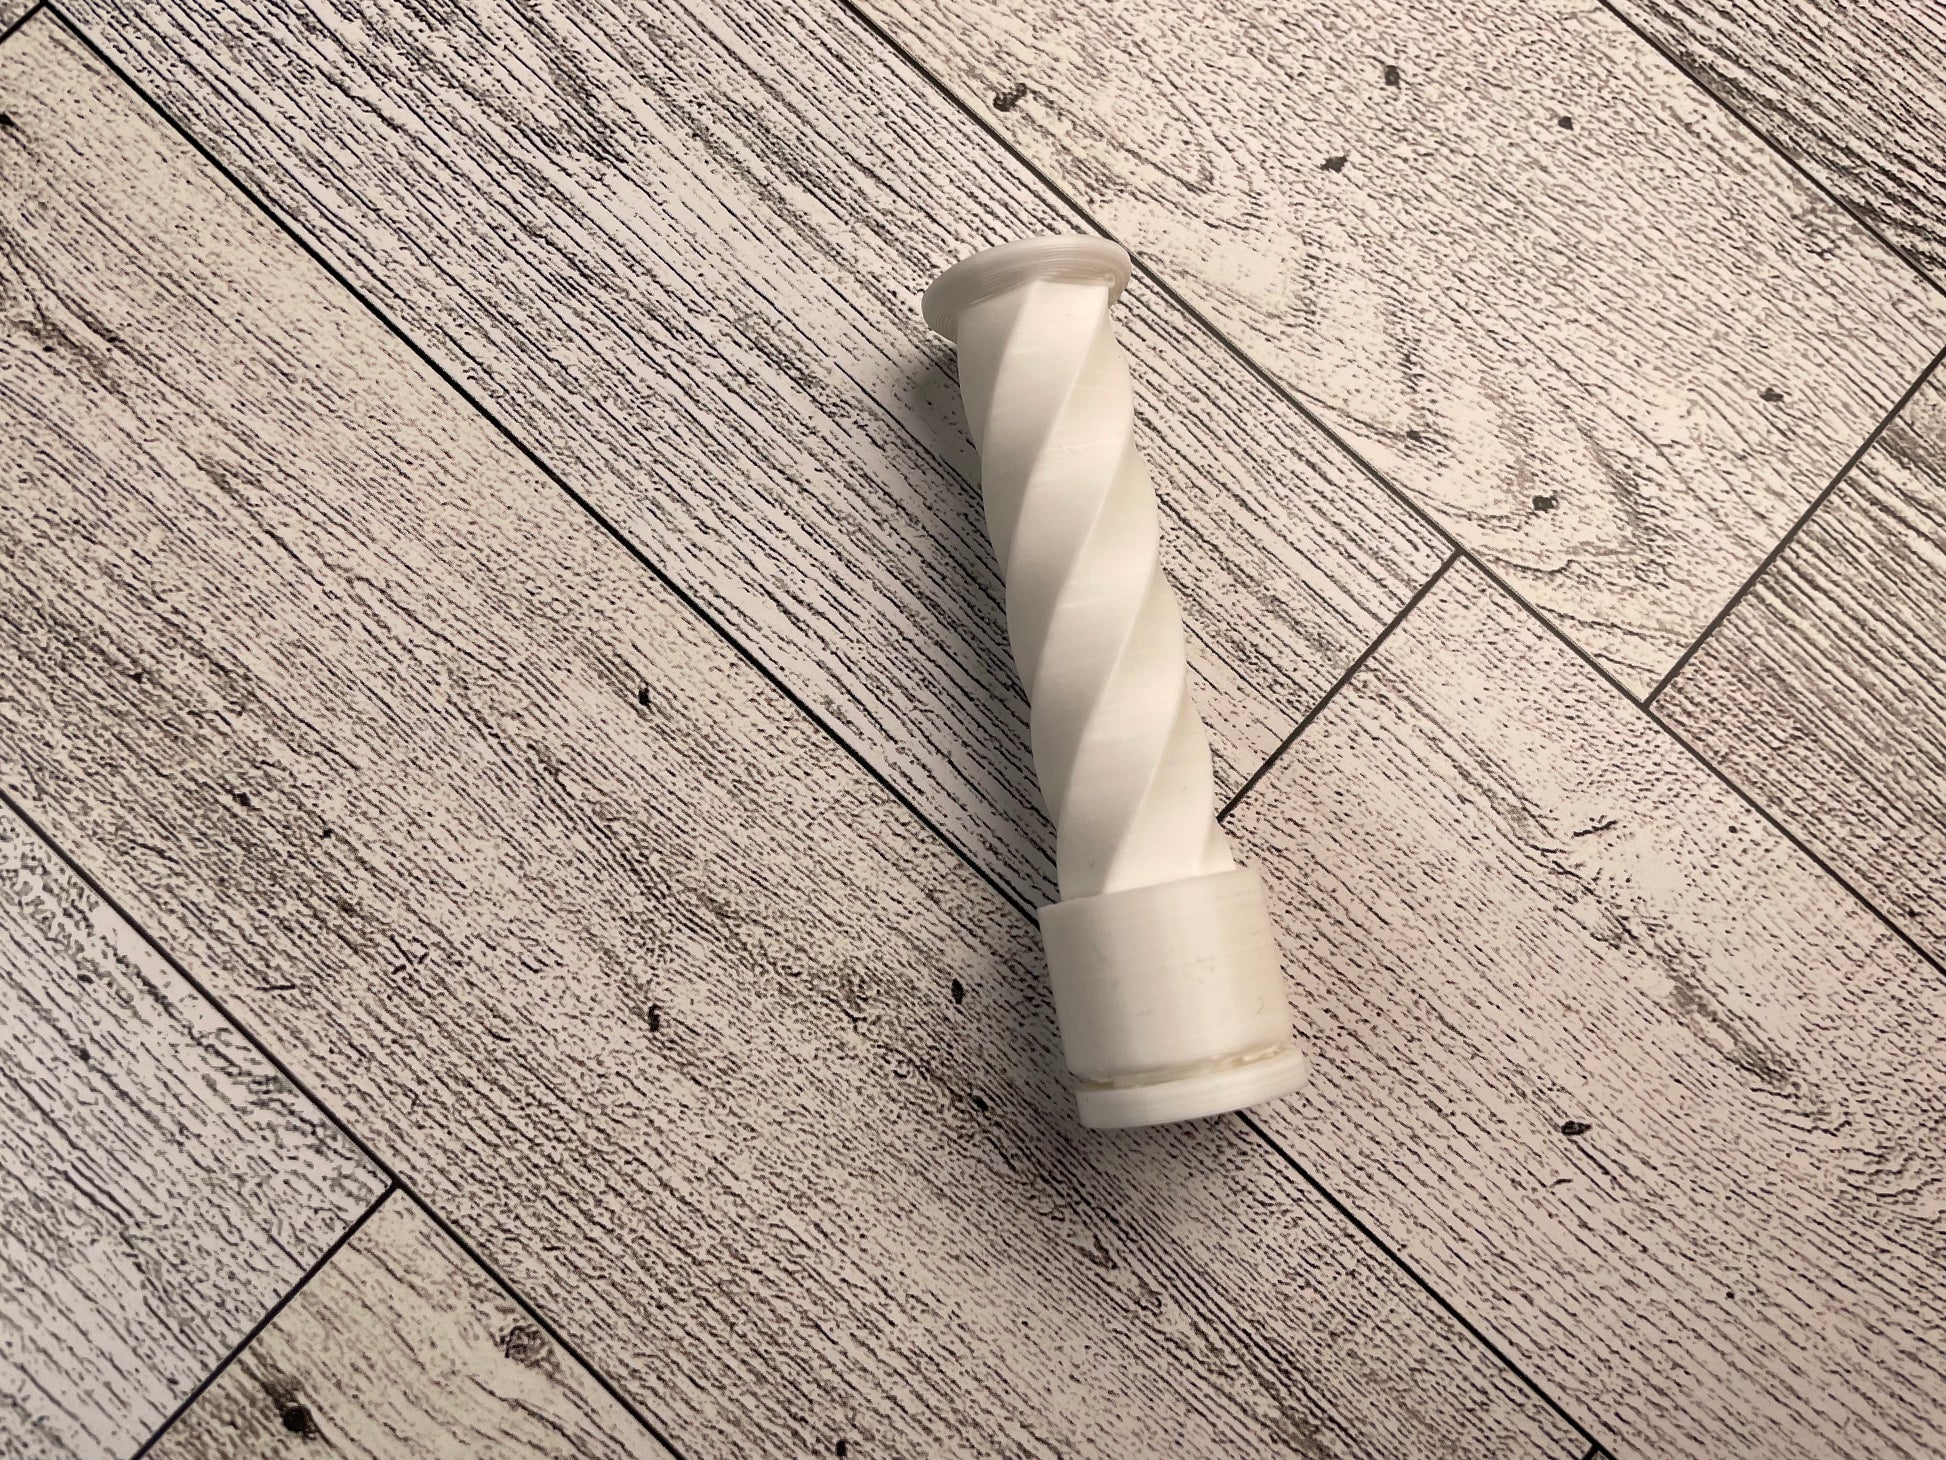 One white spiral fidget on a wood background. The tower is about 3 inches tall and an inch wide and looks like it is twised. There is a cylinder that can move up and down the tower as it spins.